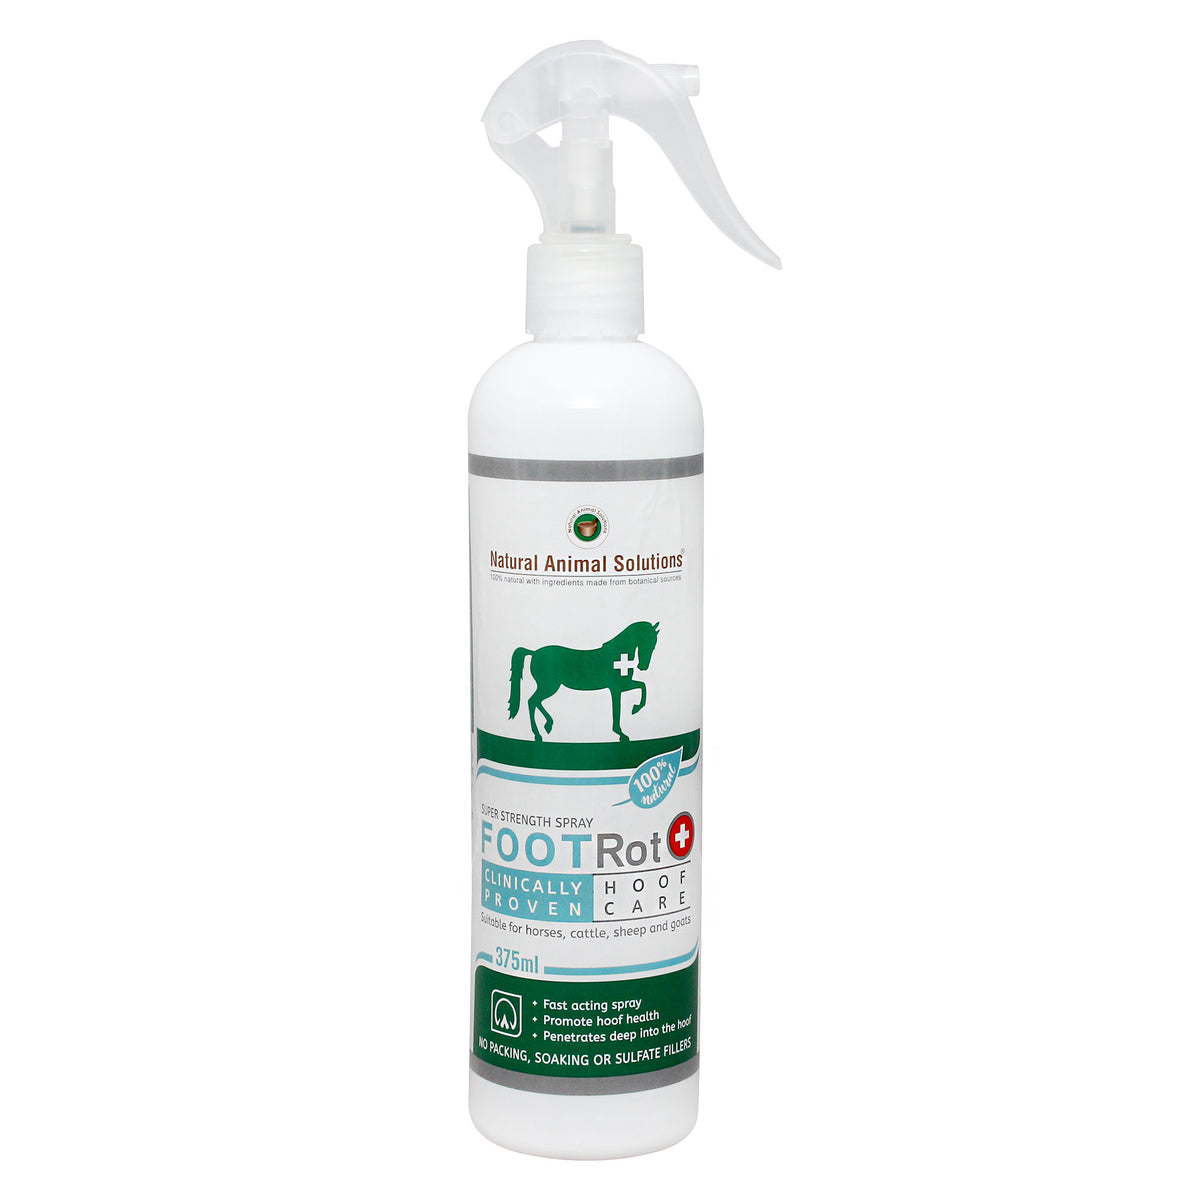 Natural Animal Solutions FootRot Hoof Treatment 375mL